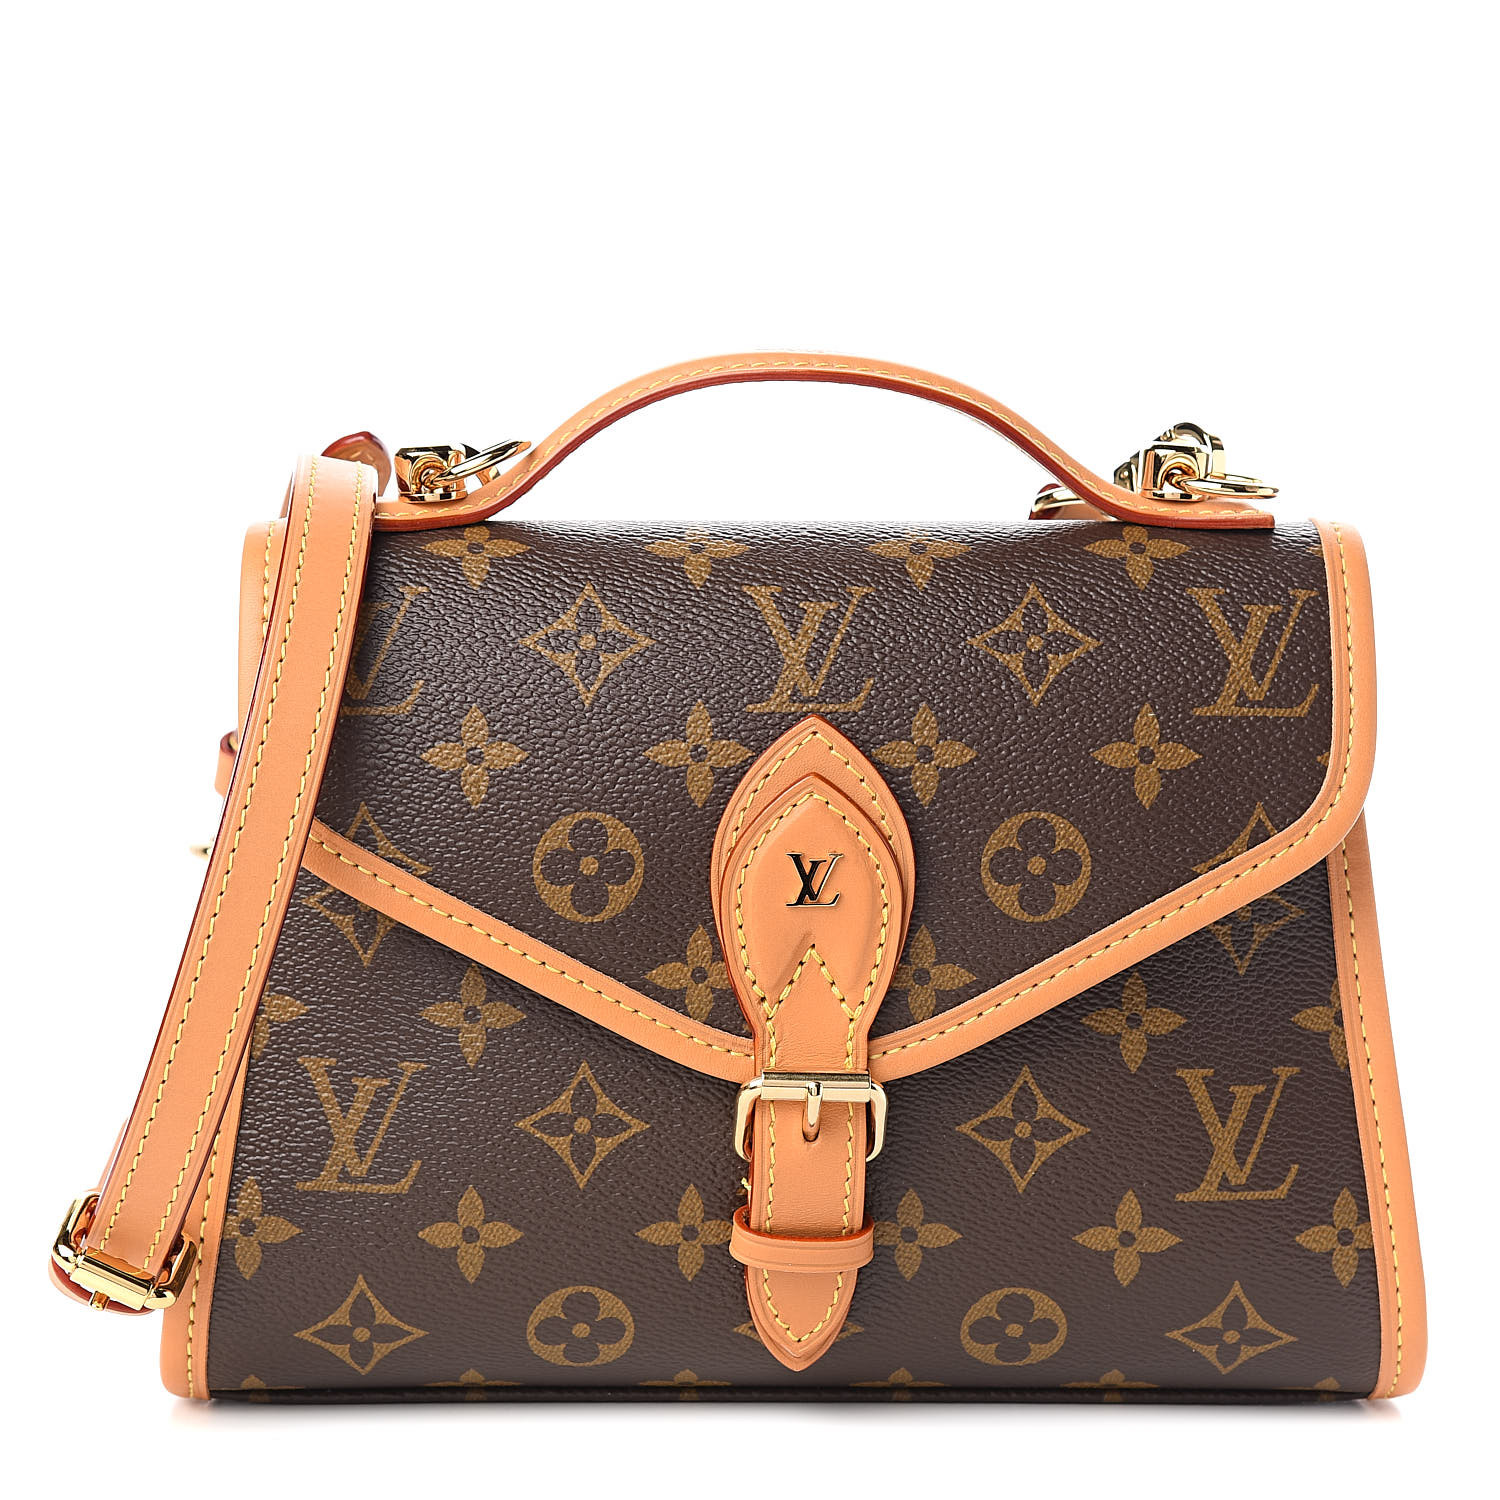 Louis Vuitton Bum Bag Serial Number - 9 For Sale on 1stDibs